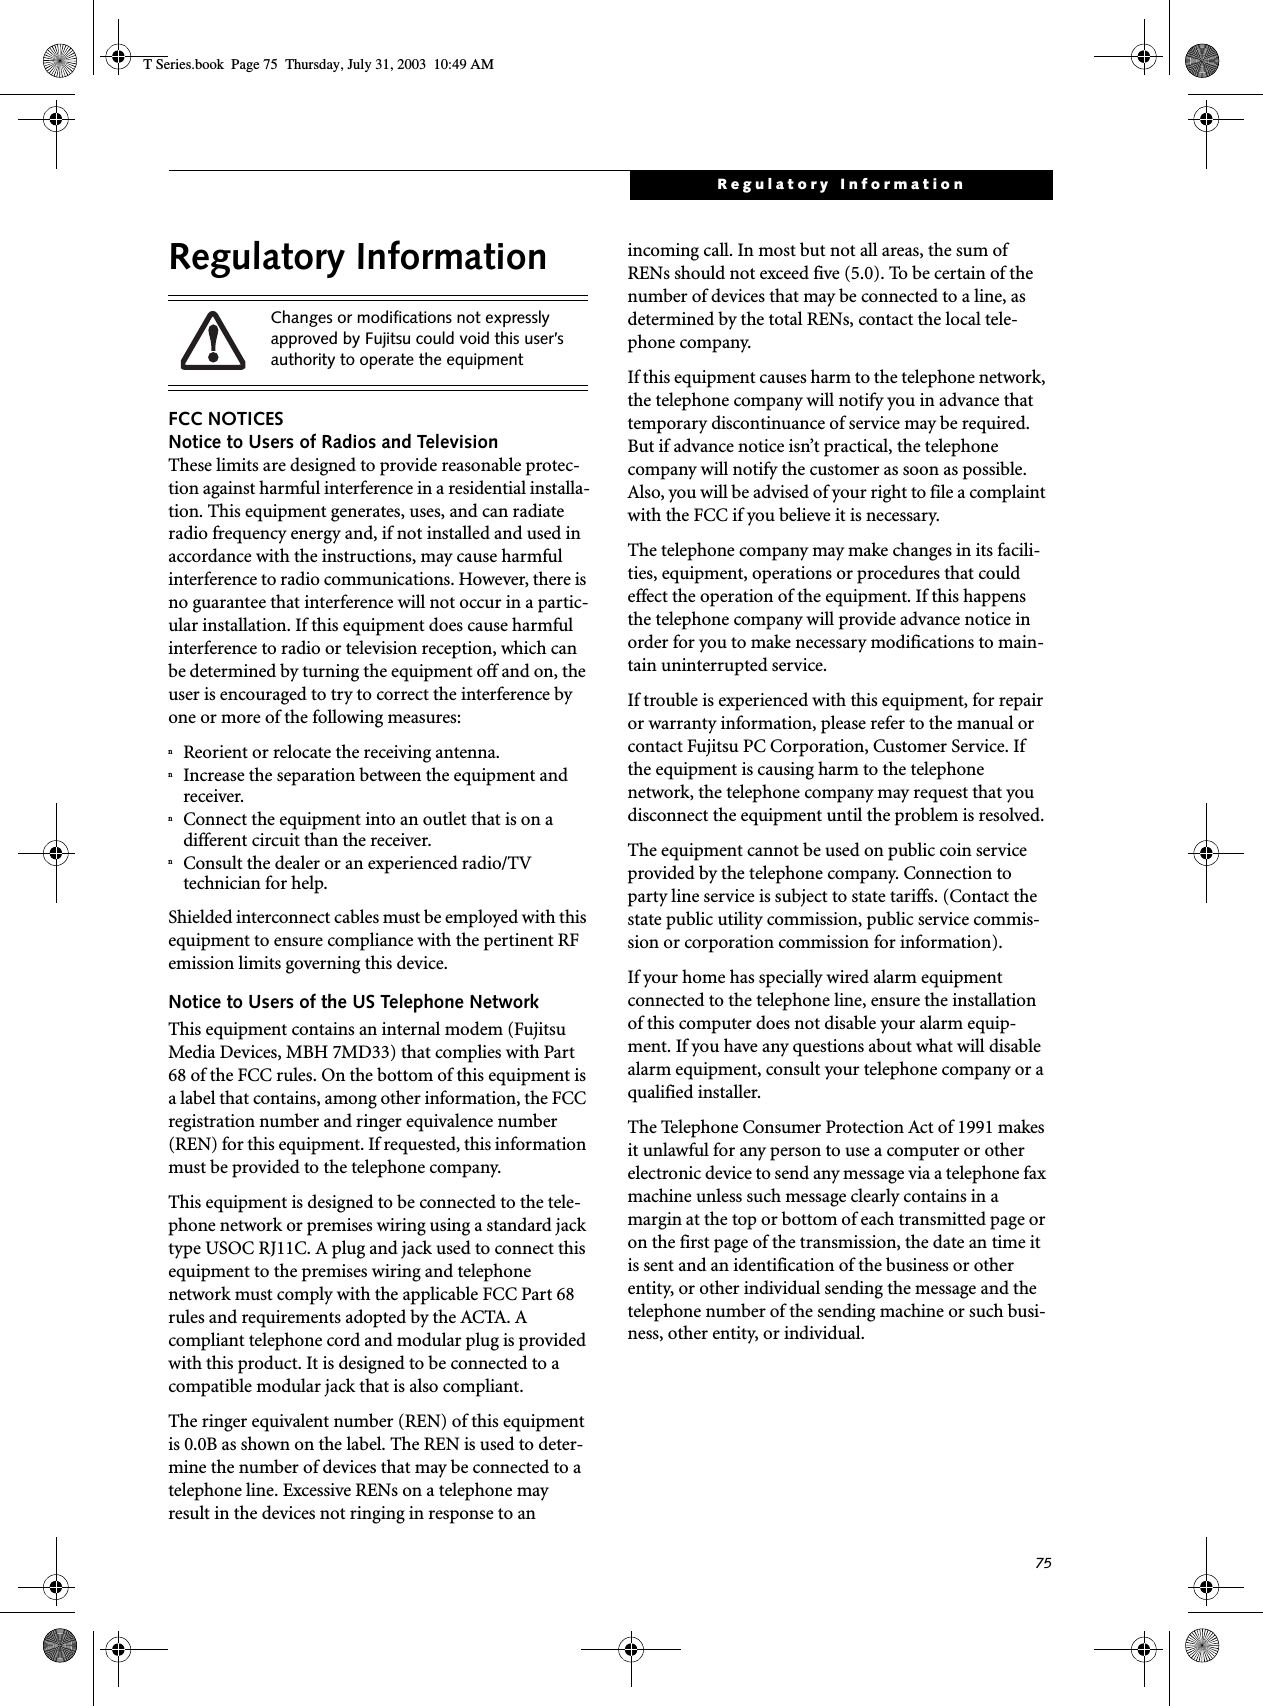 75Regulatory InformationRegulatory InformationFCC NOTICESNotice to Users of Radios and TelevisionThese limits are designed to provide reasonable protec-tion against harmful interference in a residential installa-tion. This equipment generates, uses, and can radiate radio frequency energy and, if not installed and used in accordance with the instructions, may cause harmful interference to radio communications. However, there is no guarantee that interference will not occur in a partic-ular installation. If this equipment does cause harmful interference to radio or television reception, which can be determined by turning the equipment off and on, the user is encouraged to try to correct the interference by one or more of the following measures:nReorient or relocate the receiving antenna.nIncrease the separation between the equipment and receiver.nConnect the equipment into an outlet that is on a different circuit than the receiver.nConsult the dealer or an experienced radio/TVtechnician for help.Shielded interconnect cables must be employed with this equipment to ensure compliance with the pertinent RF emission limits governing this device. Notice to Users of the US Telephone NetworkThis equipment contains an internal modem (Fujitsu Media Devices, MBH 7MD33) that complies with Part 68 of the FCC rules. On the bottom of this equipment is a label that contains, among other information, the FCC registration number and ringer equivalence number (REN) for this equipment. If requested, this information must be provided to the telephone company.This equipment is designed to be connected to the tele-phone network or premises wiring using a standard jack type USOC RJ11C. A plug and jack used to connect this equipment to the premises wiring and telephone network must comply with the applicable FCC Part 68 rules and requirements adopted by the ACTA. A compliant telephone cord and modular plug is provided with this product. It is designed to be connected to a compatible modular jack that is also compliant.The ringer equivalent number (REN) of this equipment is 0.0B as shown on the label. The REN is used to deter-mine the number of devices that may be connected to a telephone line. Excessive RENs on a telephone may result in the devices not ringing in response to an incoming call. In most but not all areas, the sum of RENs should not exceed five (5.0). To be certain of the number of devices that may be connected to a line, as determined by the total RENs, contact the local tele-phone company. If this equipment causes harm to the telephone network, the telephone company will notify you in advance that temporary discontinuance of service may be required. But if advance notice isn’t practical, the telephone company will notify the customer as soon as possible. Also, you will be advised of your right to file a complaint with the FCC if you believe it is necessary.The telephone company may make changes in its facili-ties, equipment, operations or procedures that could effect the operation of the equipment. If this happens the telephone company will provide advance notice in order for you to make necessary modifications to main-tain uninterrupted service. If trouble is experienced with this equipment, for repair or warranty information, please refer to the manual or contact Fujitsu PC Corporation, Customer Service. If the equipment is causing harm to the telephone network, the telephone company may request that you disconnect the equipment until the problem is resolved.The equipment cannot be used on public coin service provided by the telephone company. Connection to party line service is subject to state tariffs. (Contact the state public utility commission, public service commis-sion or corporation commission for information). If your home has specially wired alarm equipment connected to the telephone line, ensure the installation of this computer does not disable your alarm equip-ment. If you have any questions about what will disable alarm equipment, consult your telephone company or a qualified installer.The Telephone Consumer Protection Act of 1991 makes it unlawful for any person to use a computer or other electronic device to send any message via a telephone fax machine unless such message clearly contains in a margin at the top or bottom of each transmitted page or on the first page of the transmission, the date an time it is sent and an identification of the business or other entity, or other individual sending the message and the telephone number of the sending machine or such busi-ness, other entity, or individual.Changes or modifications not expressly approved by Fujitsu could void this user’s authority to operate the equipmentT Series.book  Page 75  Thursday, July 31, 2003  10:49 AM